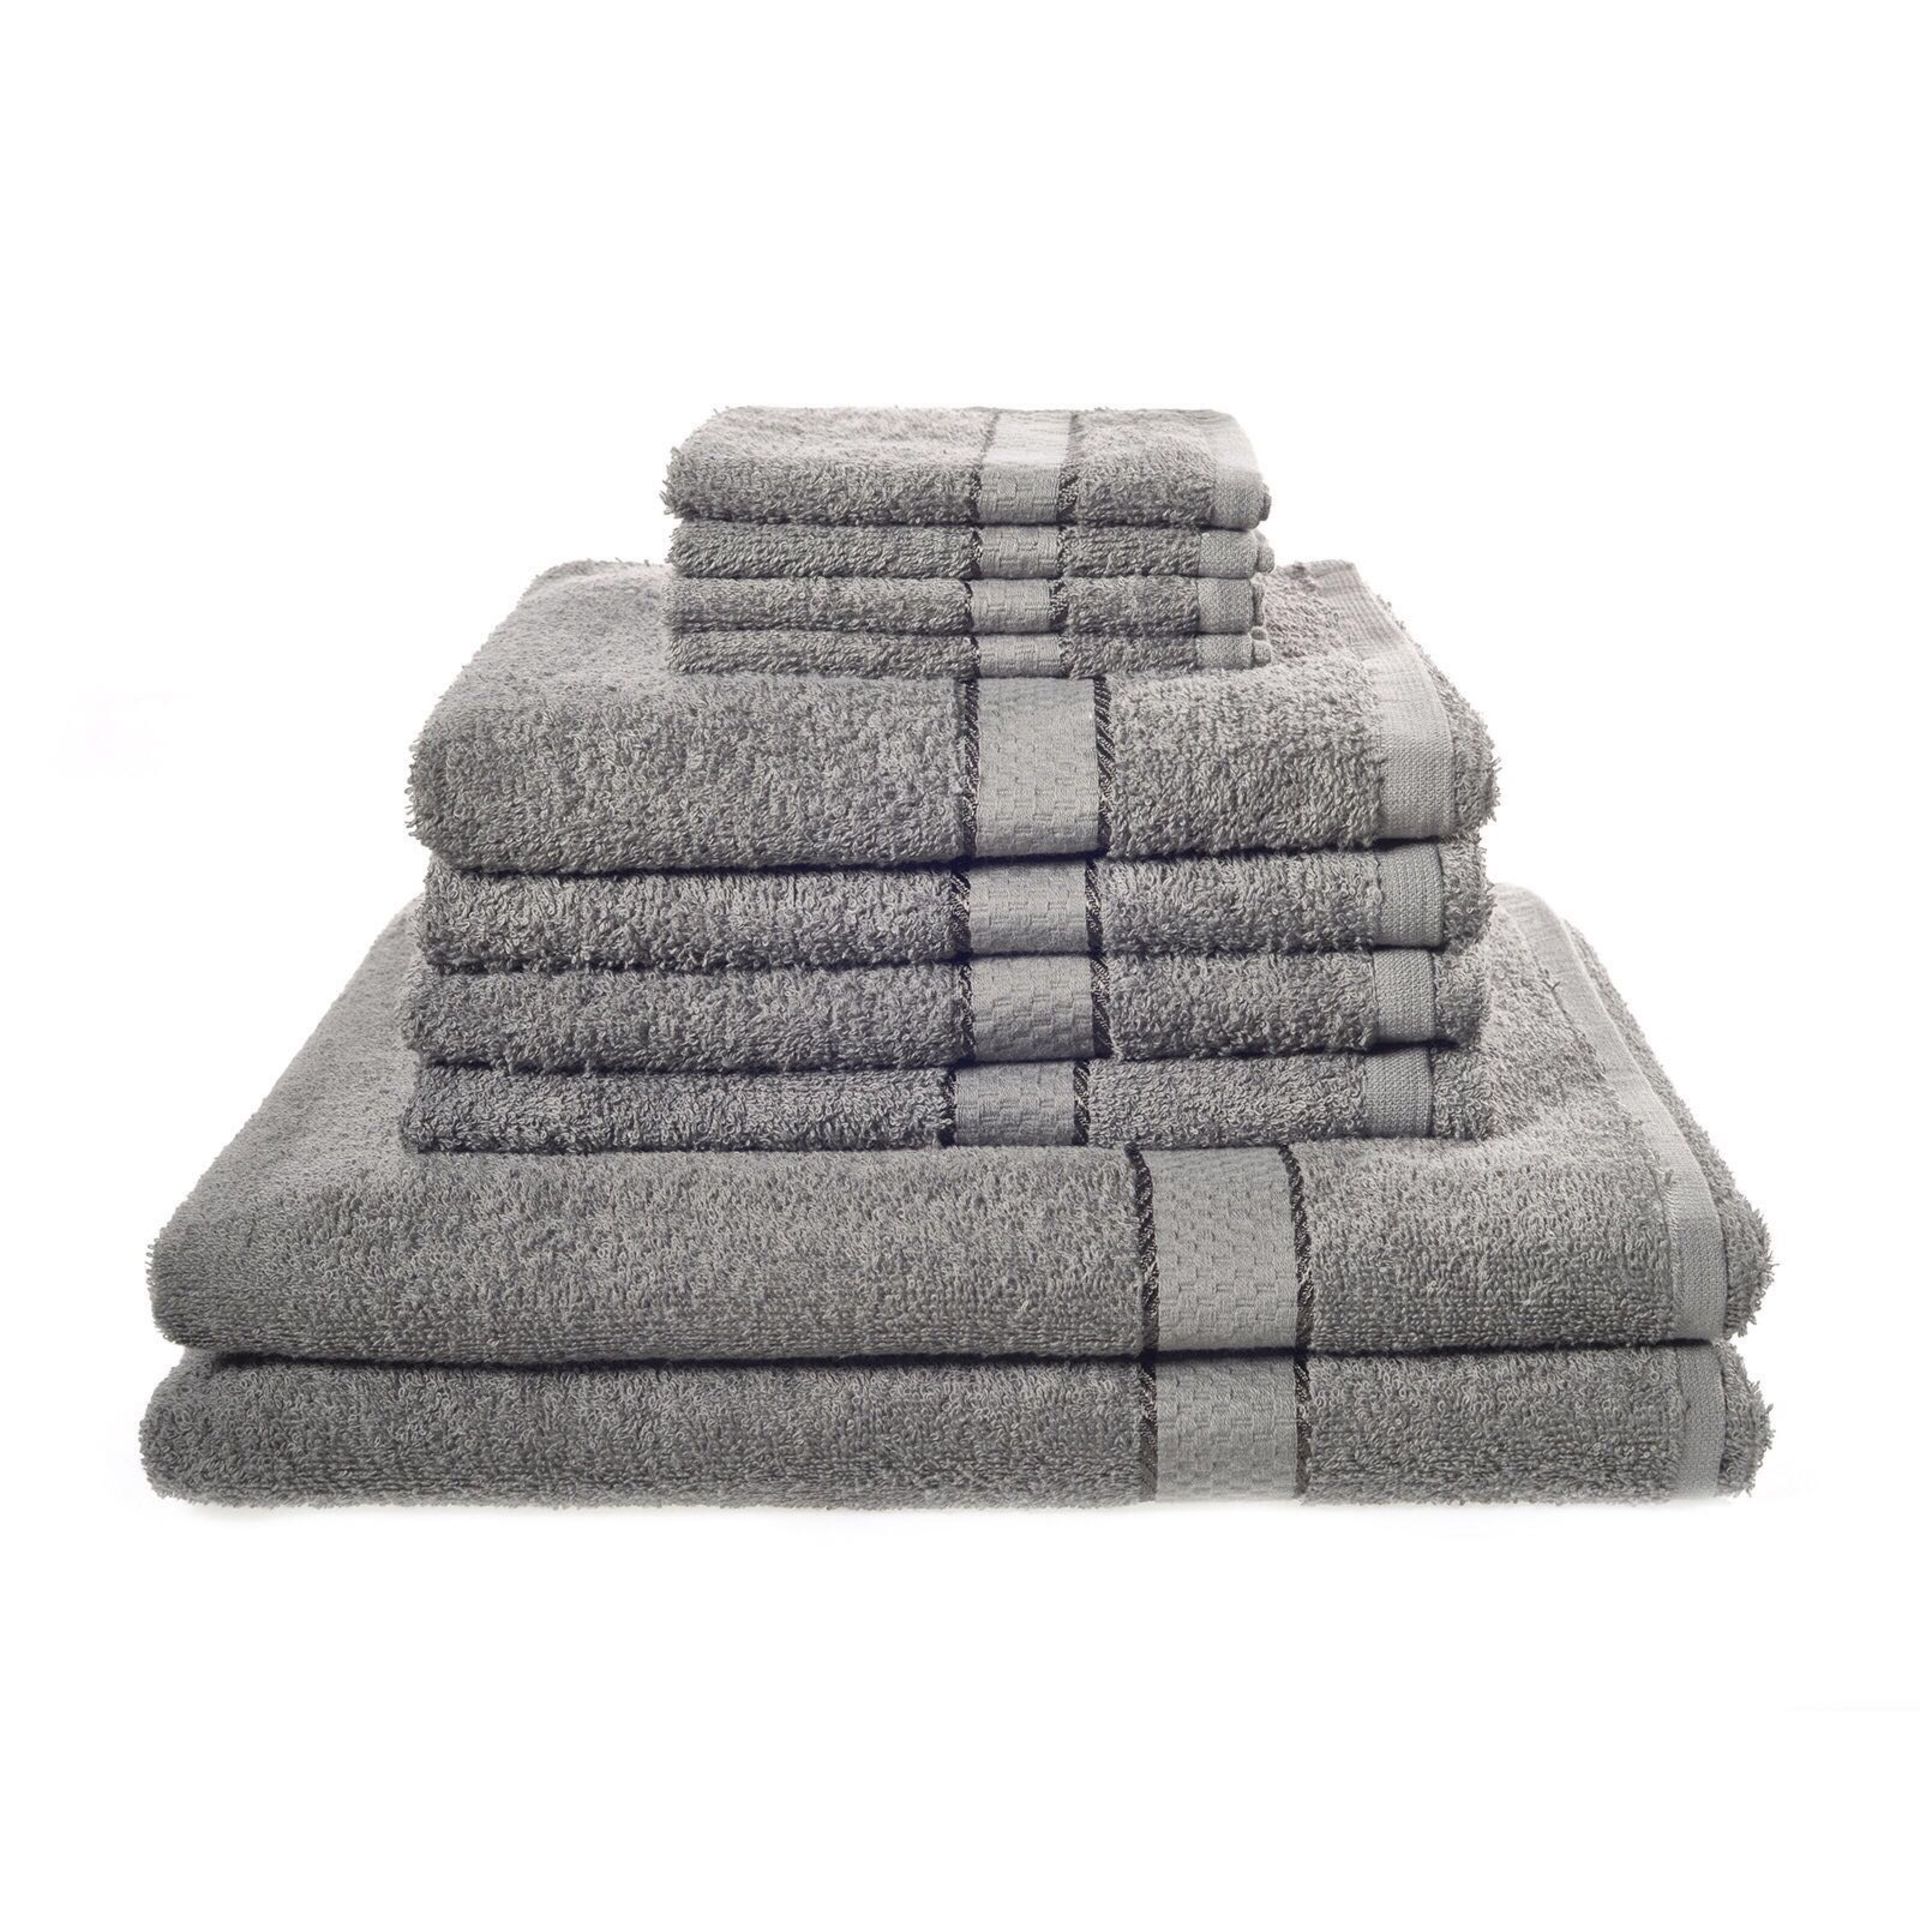 V *TRADE QTY* Brand New Luxury 10 Piece Silver Towel Bale Set - 4 x Face Cloths - 4 x Hand